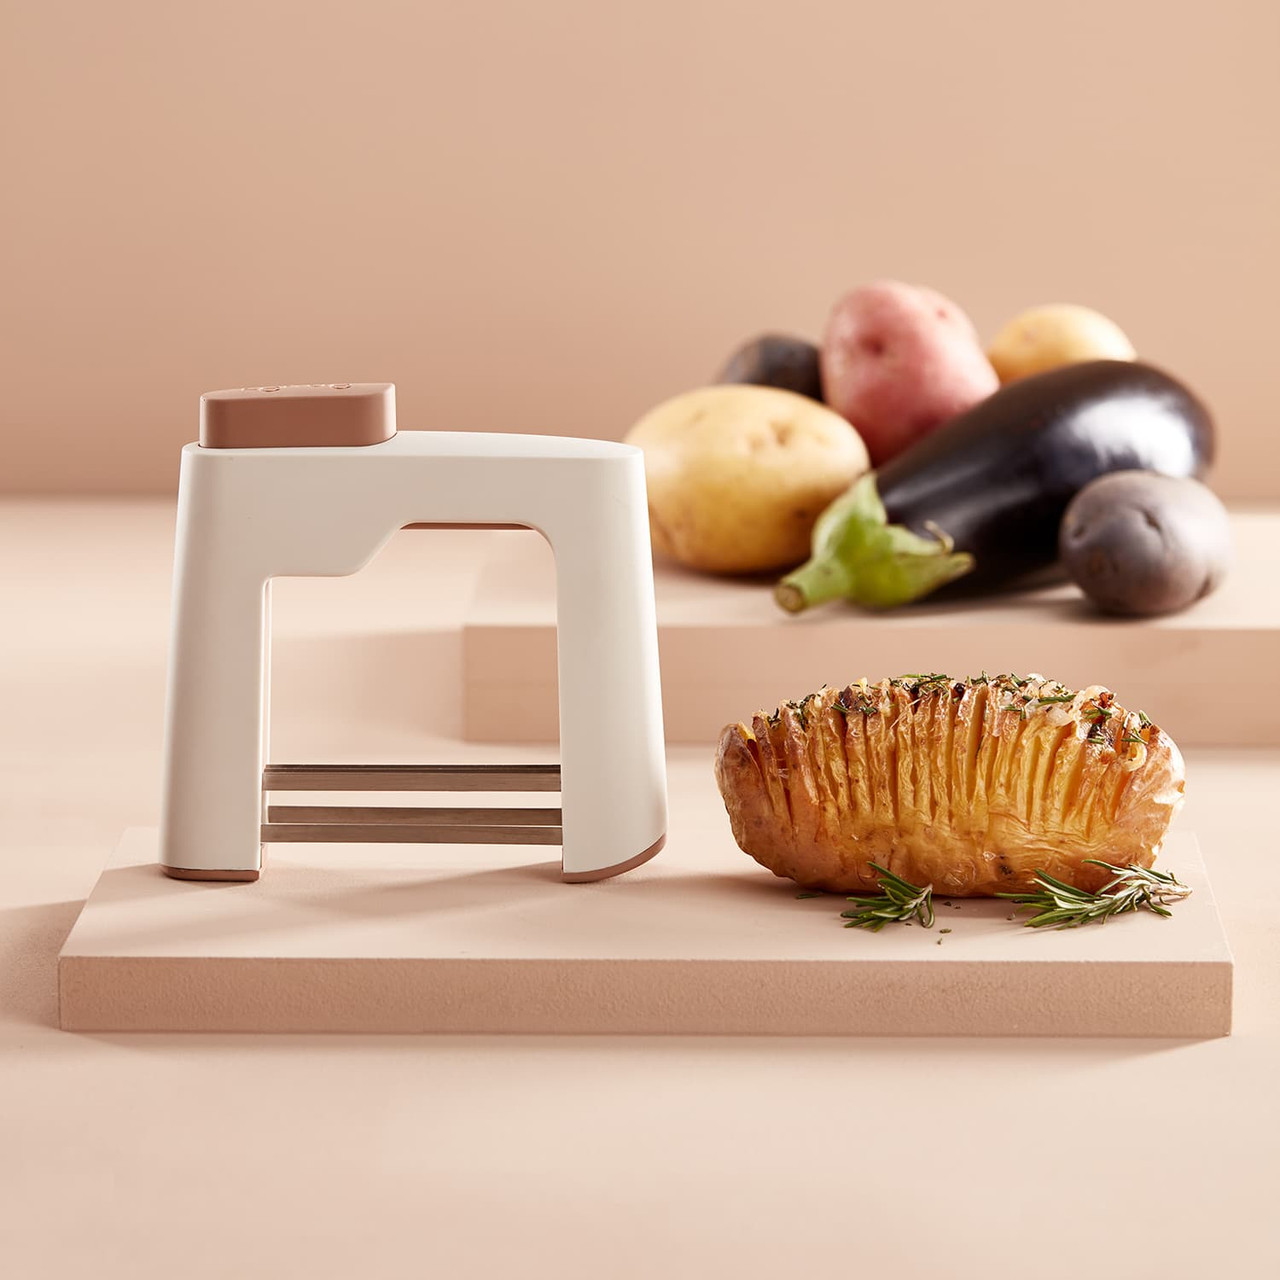  Lacor HASSELBACK Potato Cutter 18/10 Stainless Steel, 18 x 10  cm, Plastic: Home & Kitchen